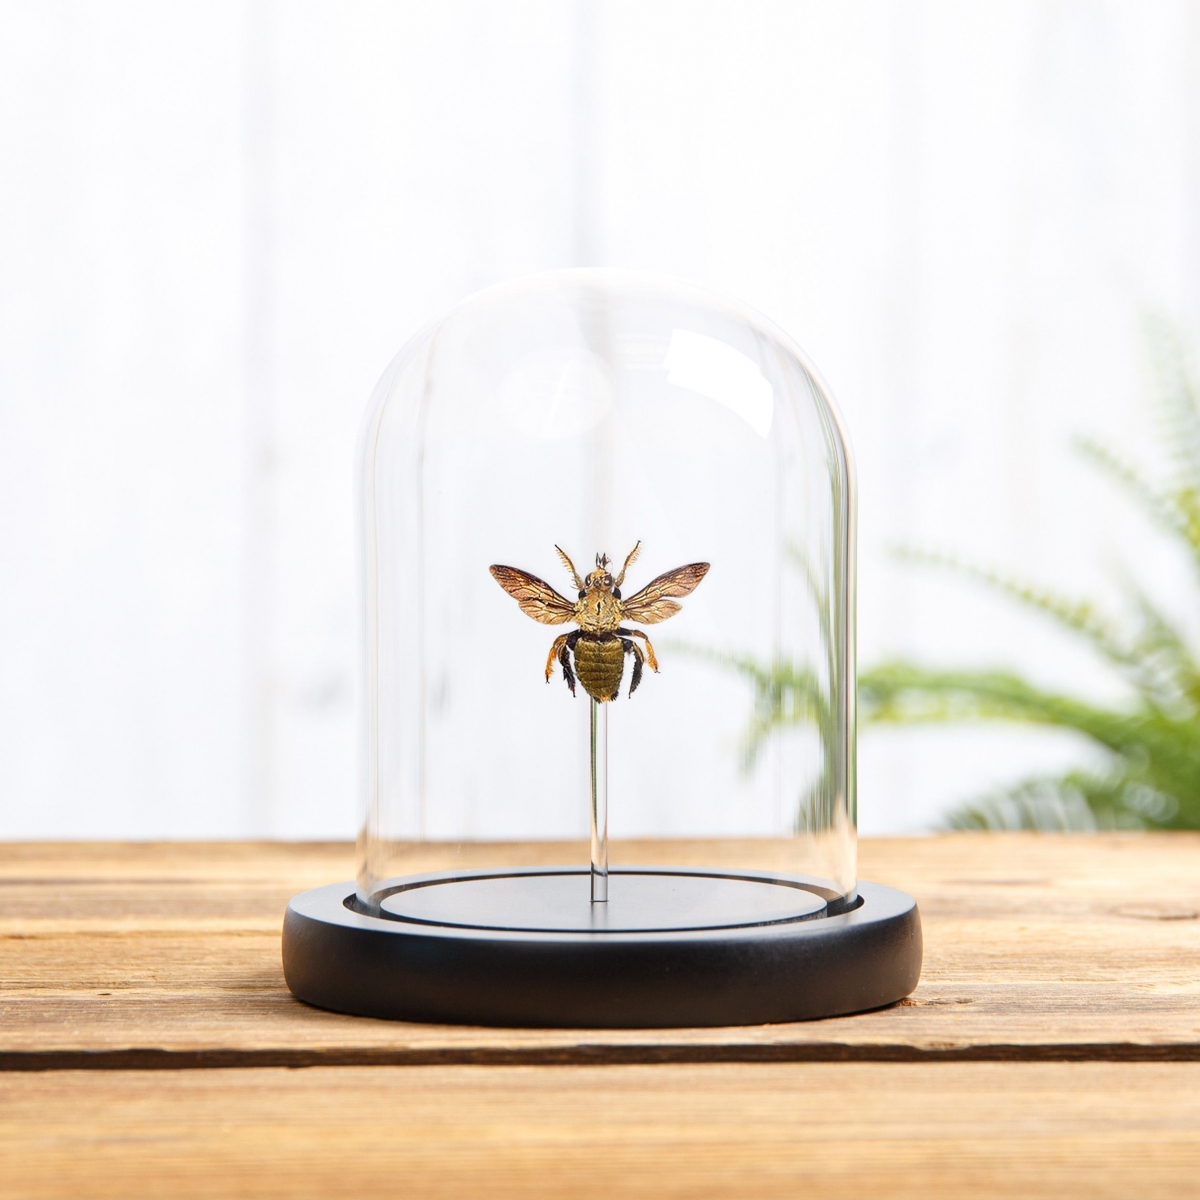 Minibeast The Carpenter Bee in Glass Dome with Wooden Base  (Xylocopa confusa)